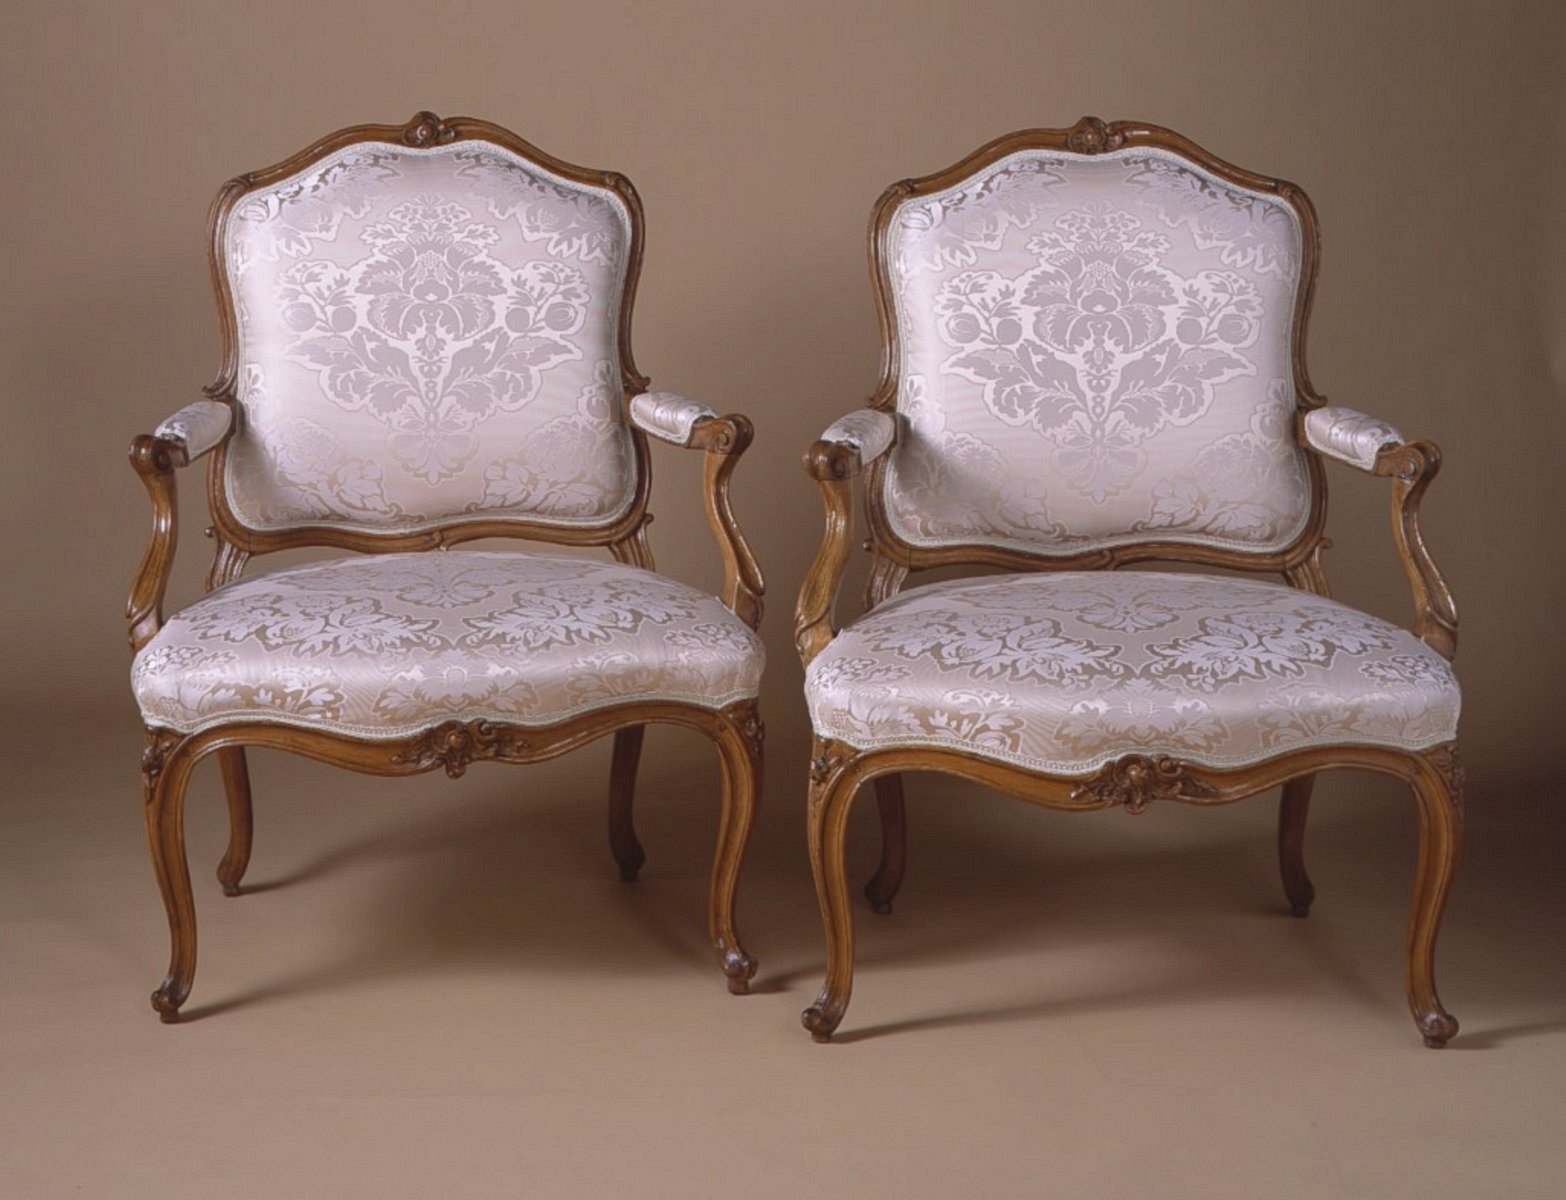 Pair of French Louis XV Period, Beechwood Fauteuils Stamped, “S Blanchard”